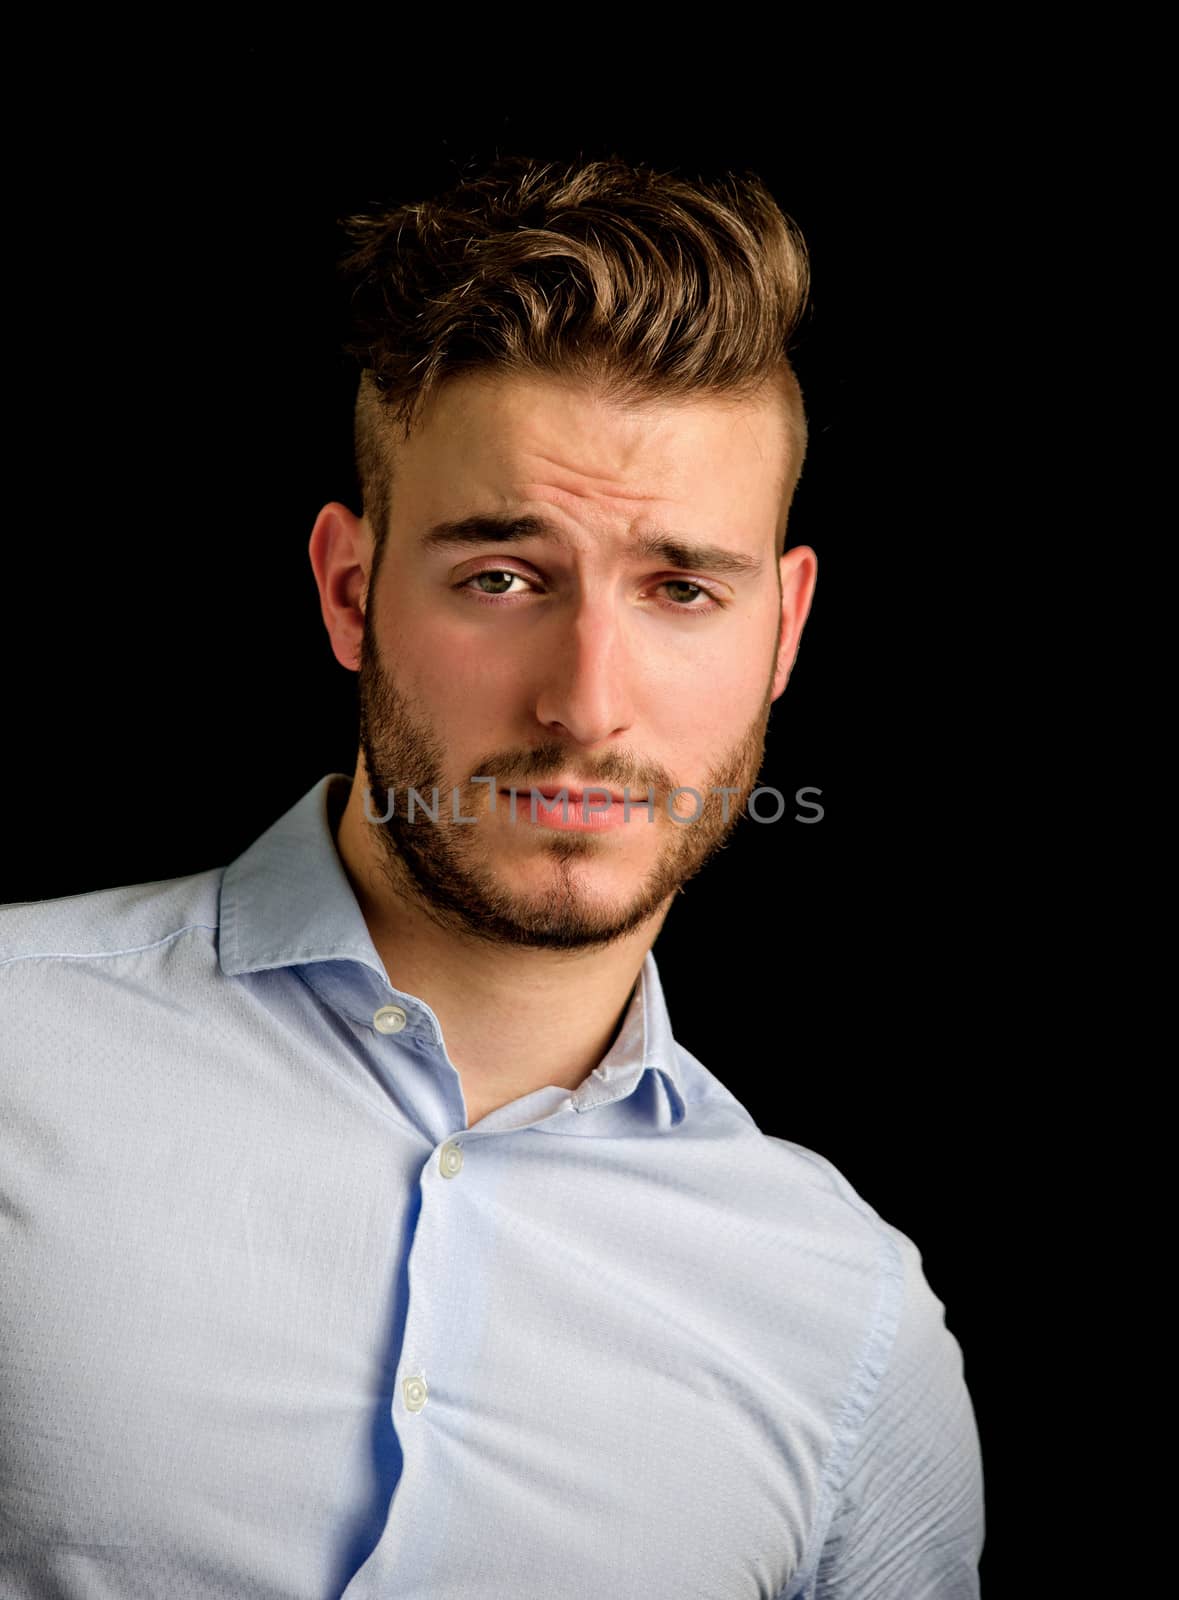 Handsome young man portrait with doubtful, unsure expression, isolated on black background